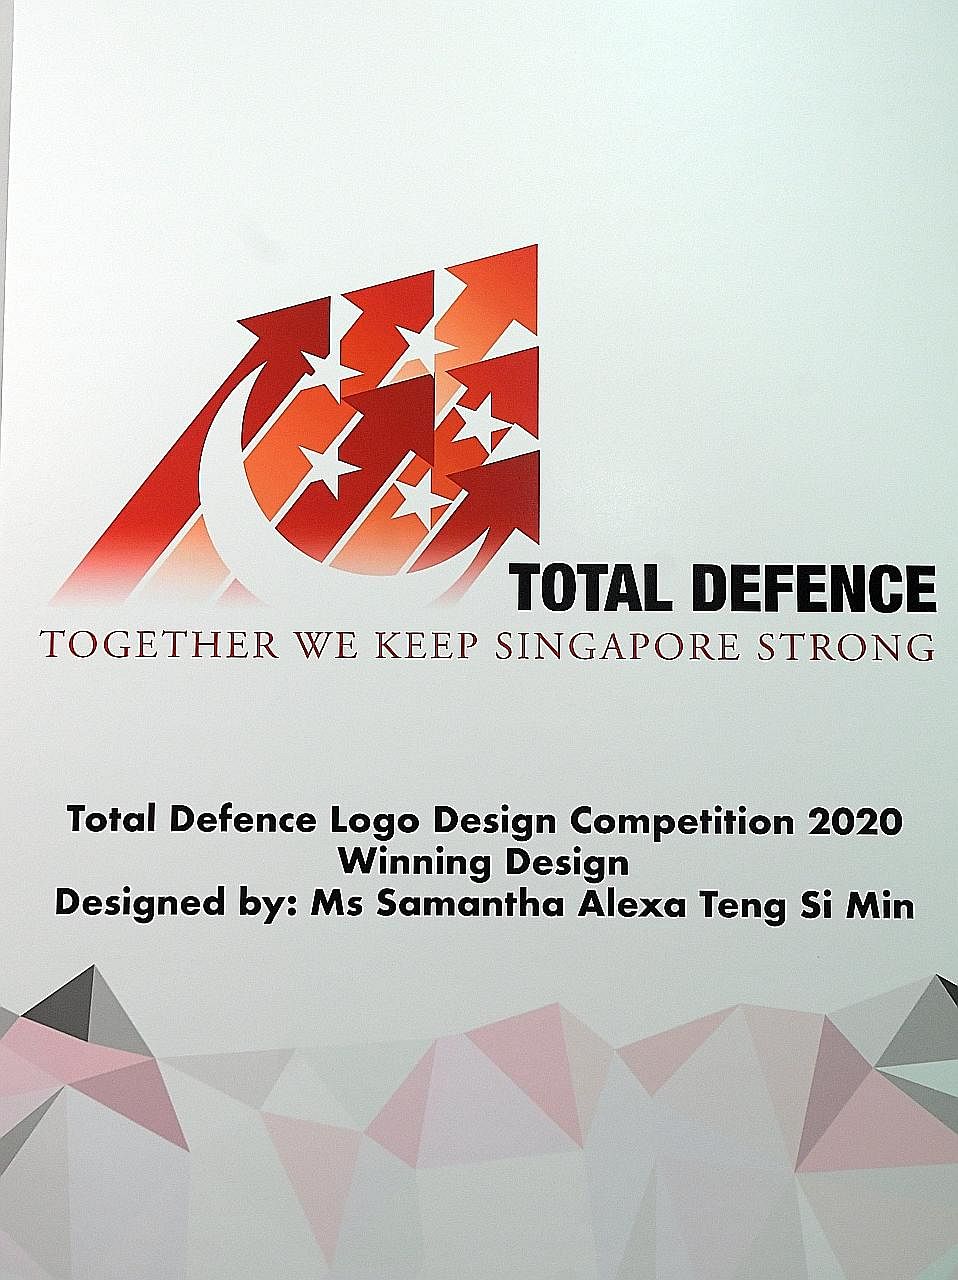 Minister for Trade and Industry Chan Chun Sing chatting with Ms Samantha Alexa Teng (right), the winner of the Total Defence Logo Design Competition 2020 (below). Beside him is Colonel Jerica Goh, director of Nexus, the Ministry of Defence's central 